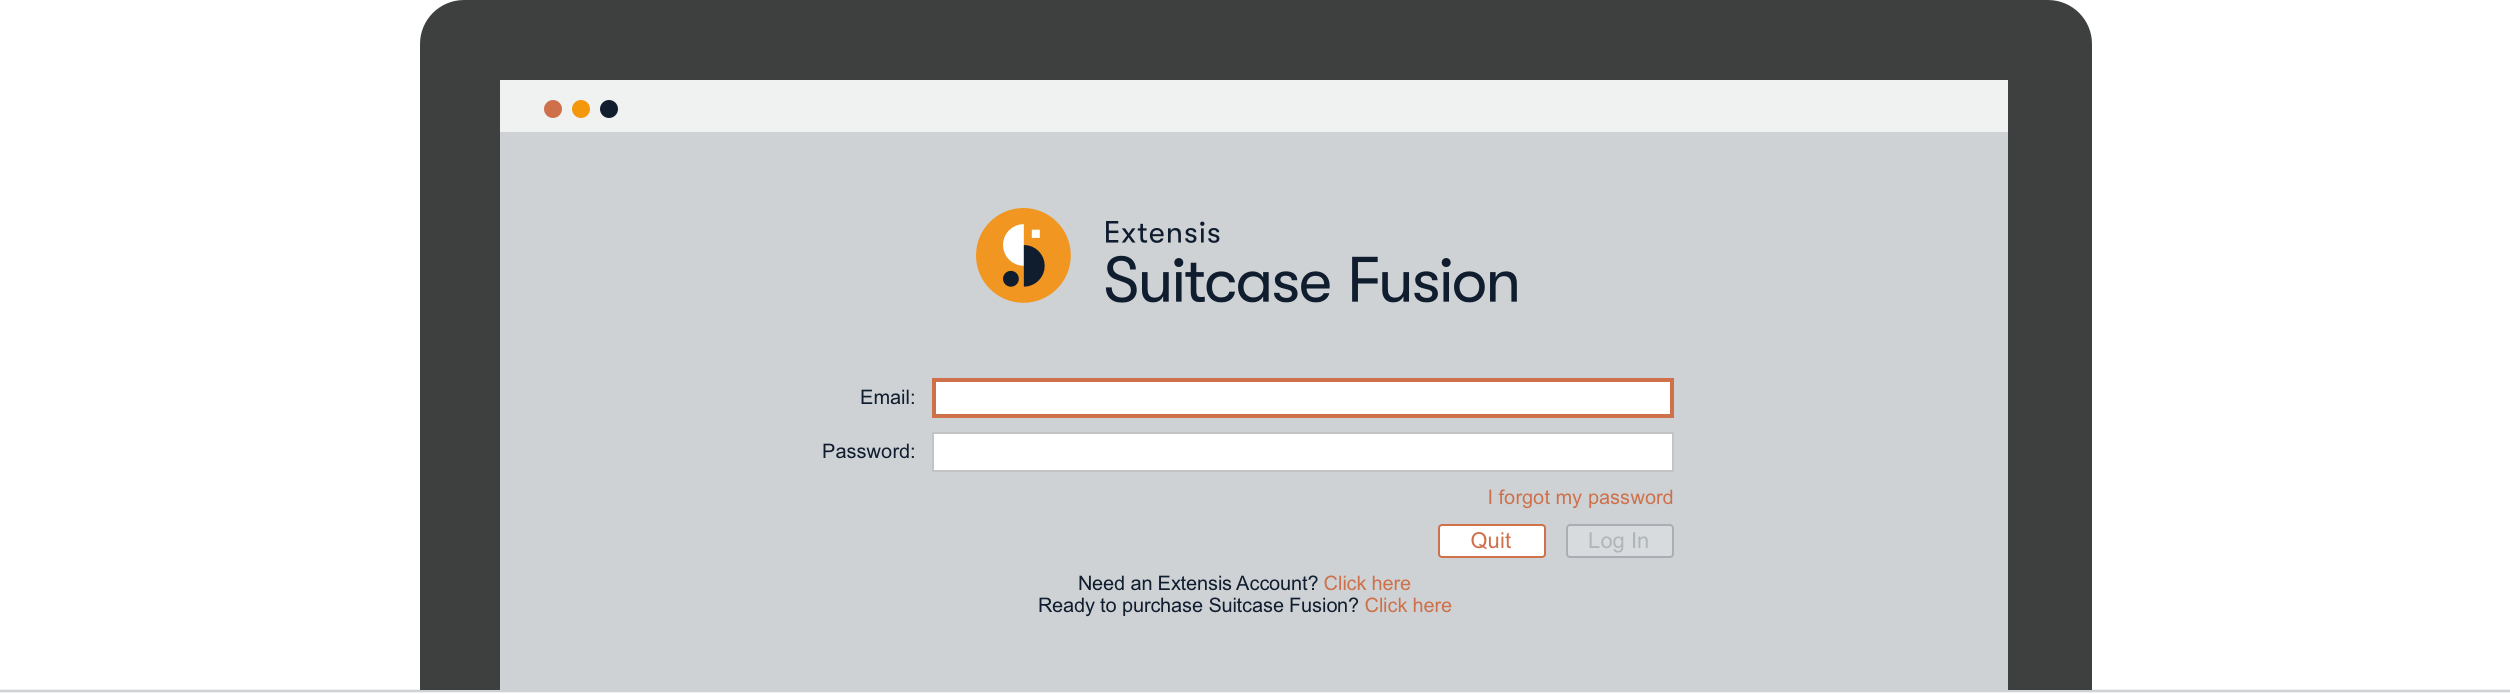 extensis suitcase fusion 7 free